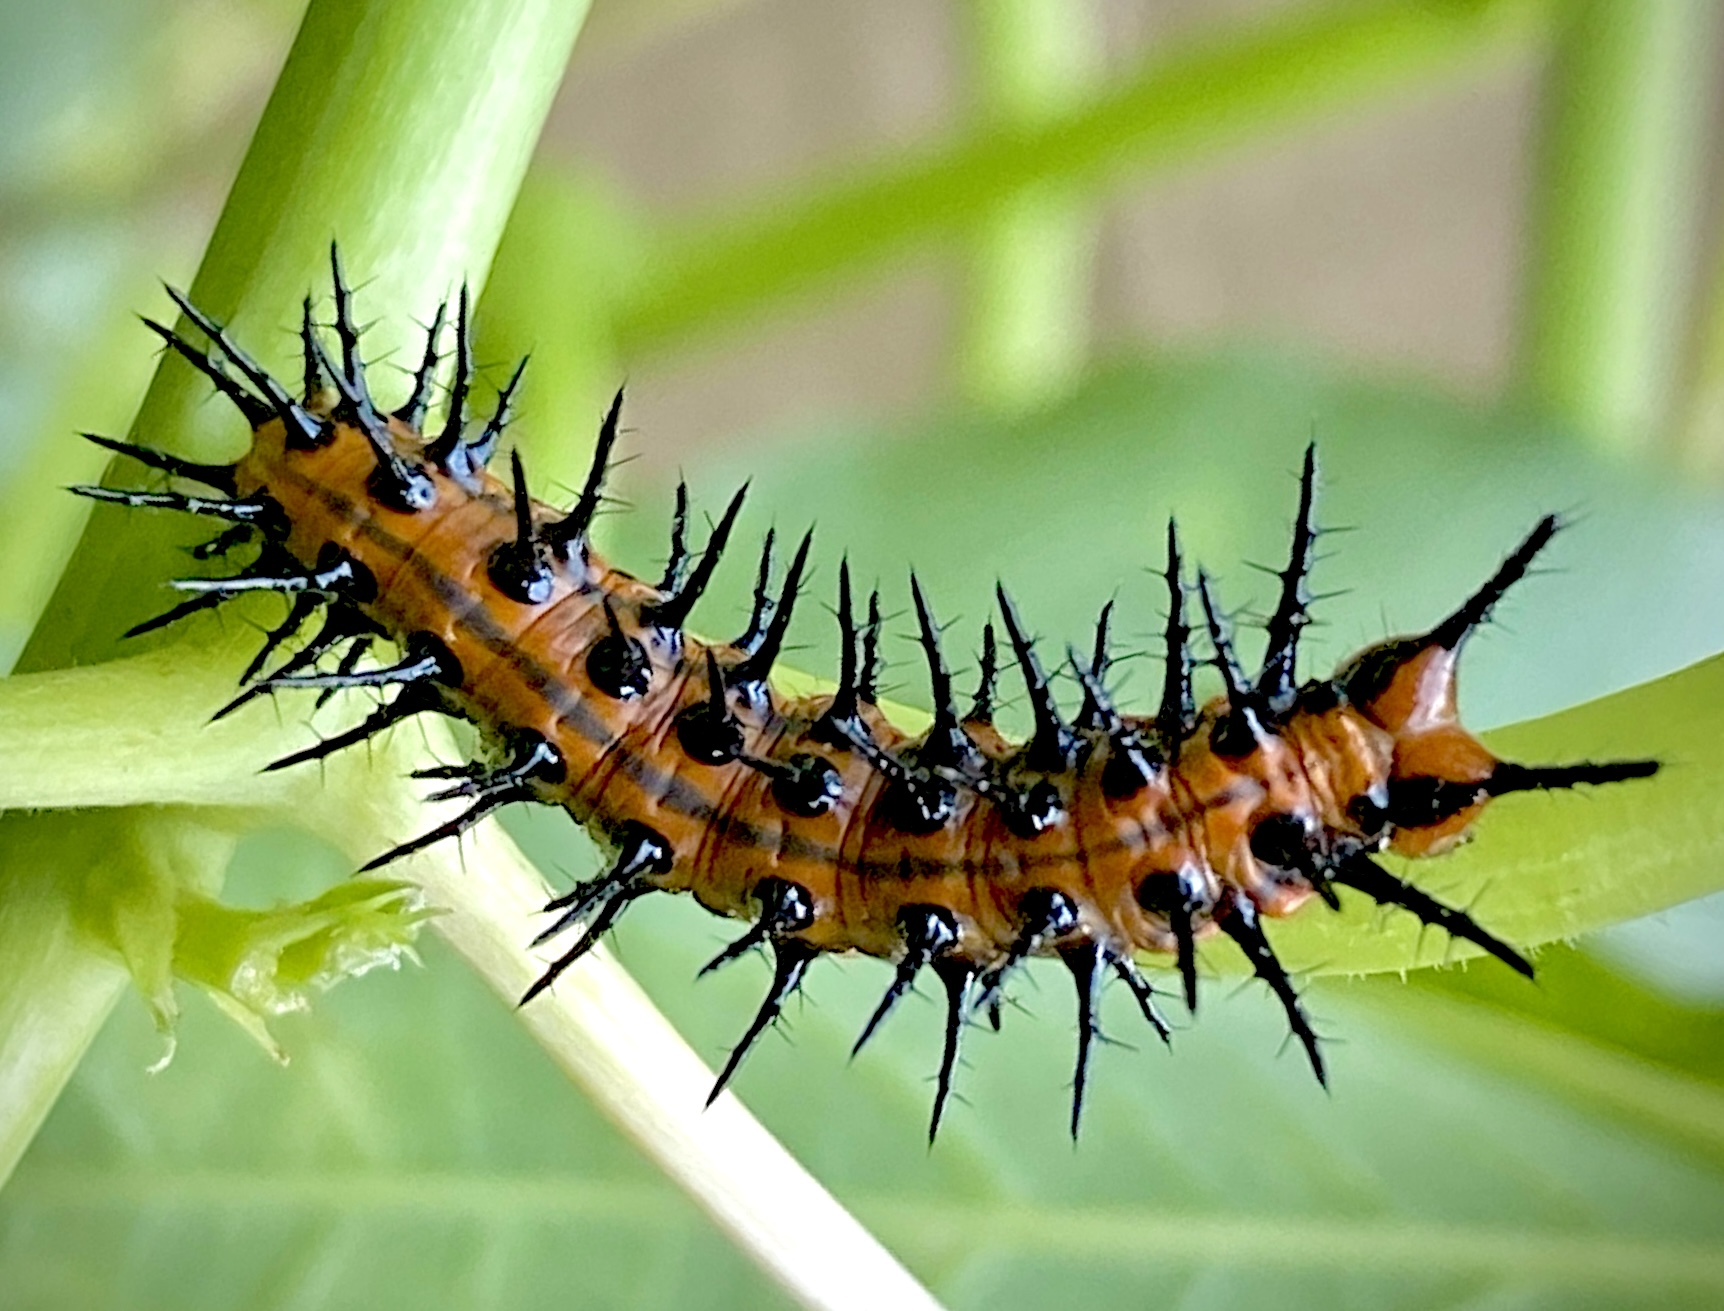 Gulf fritillary caterpillars are rather unsightly little creatures that will, as I discovered, munch through every last leaf on a passion vine!
